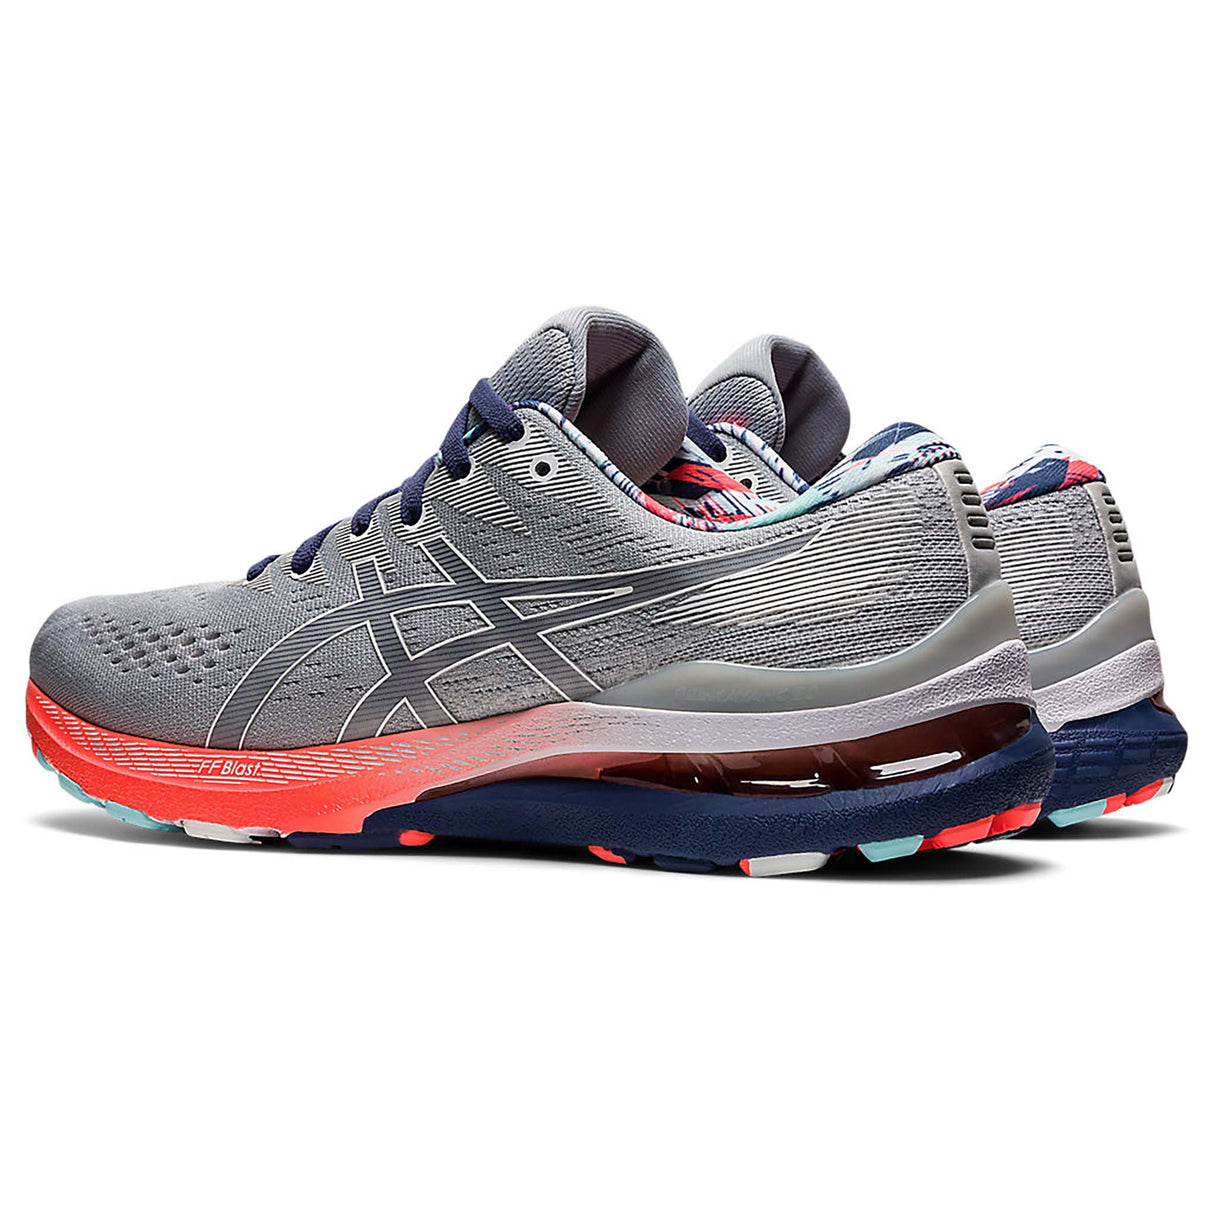 ASICS Kayano 28 homme piedmont grey thunder blue paire lateral